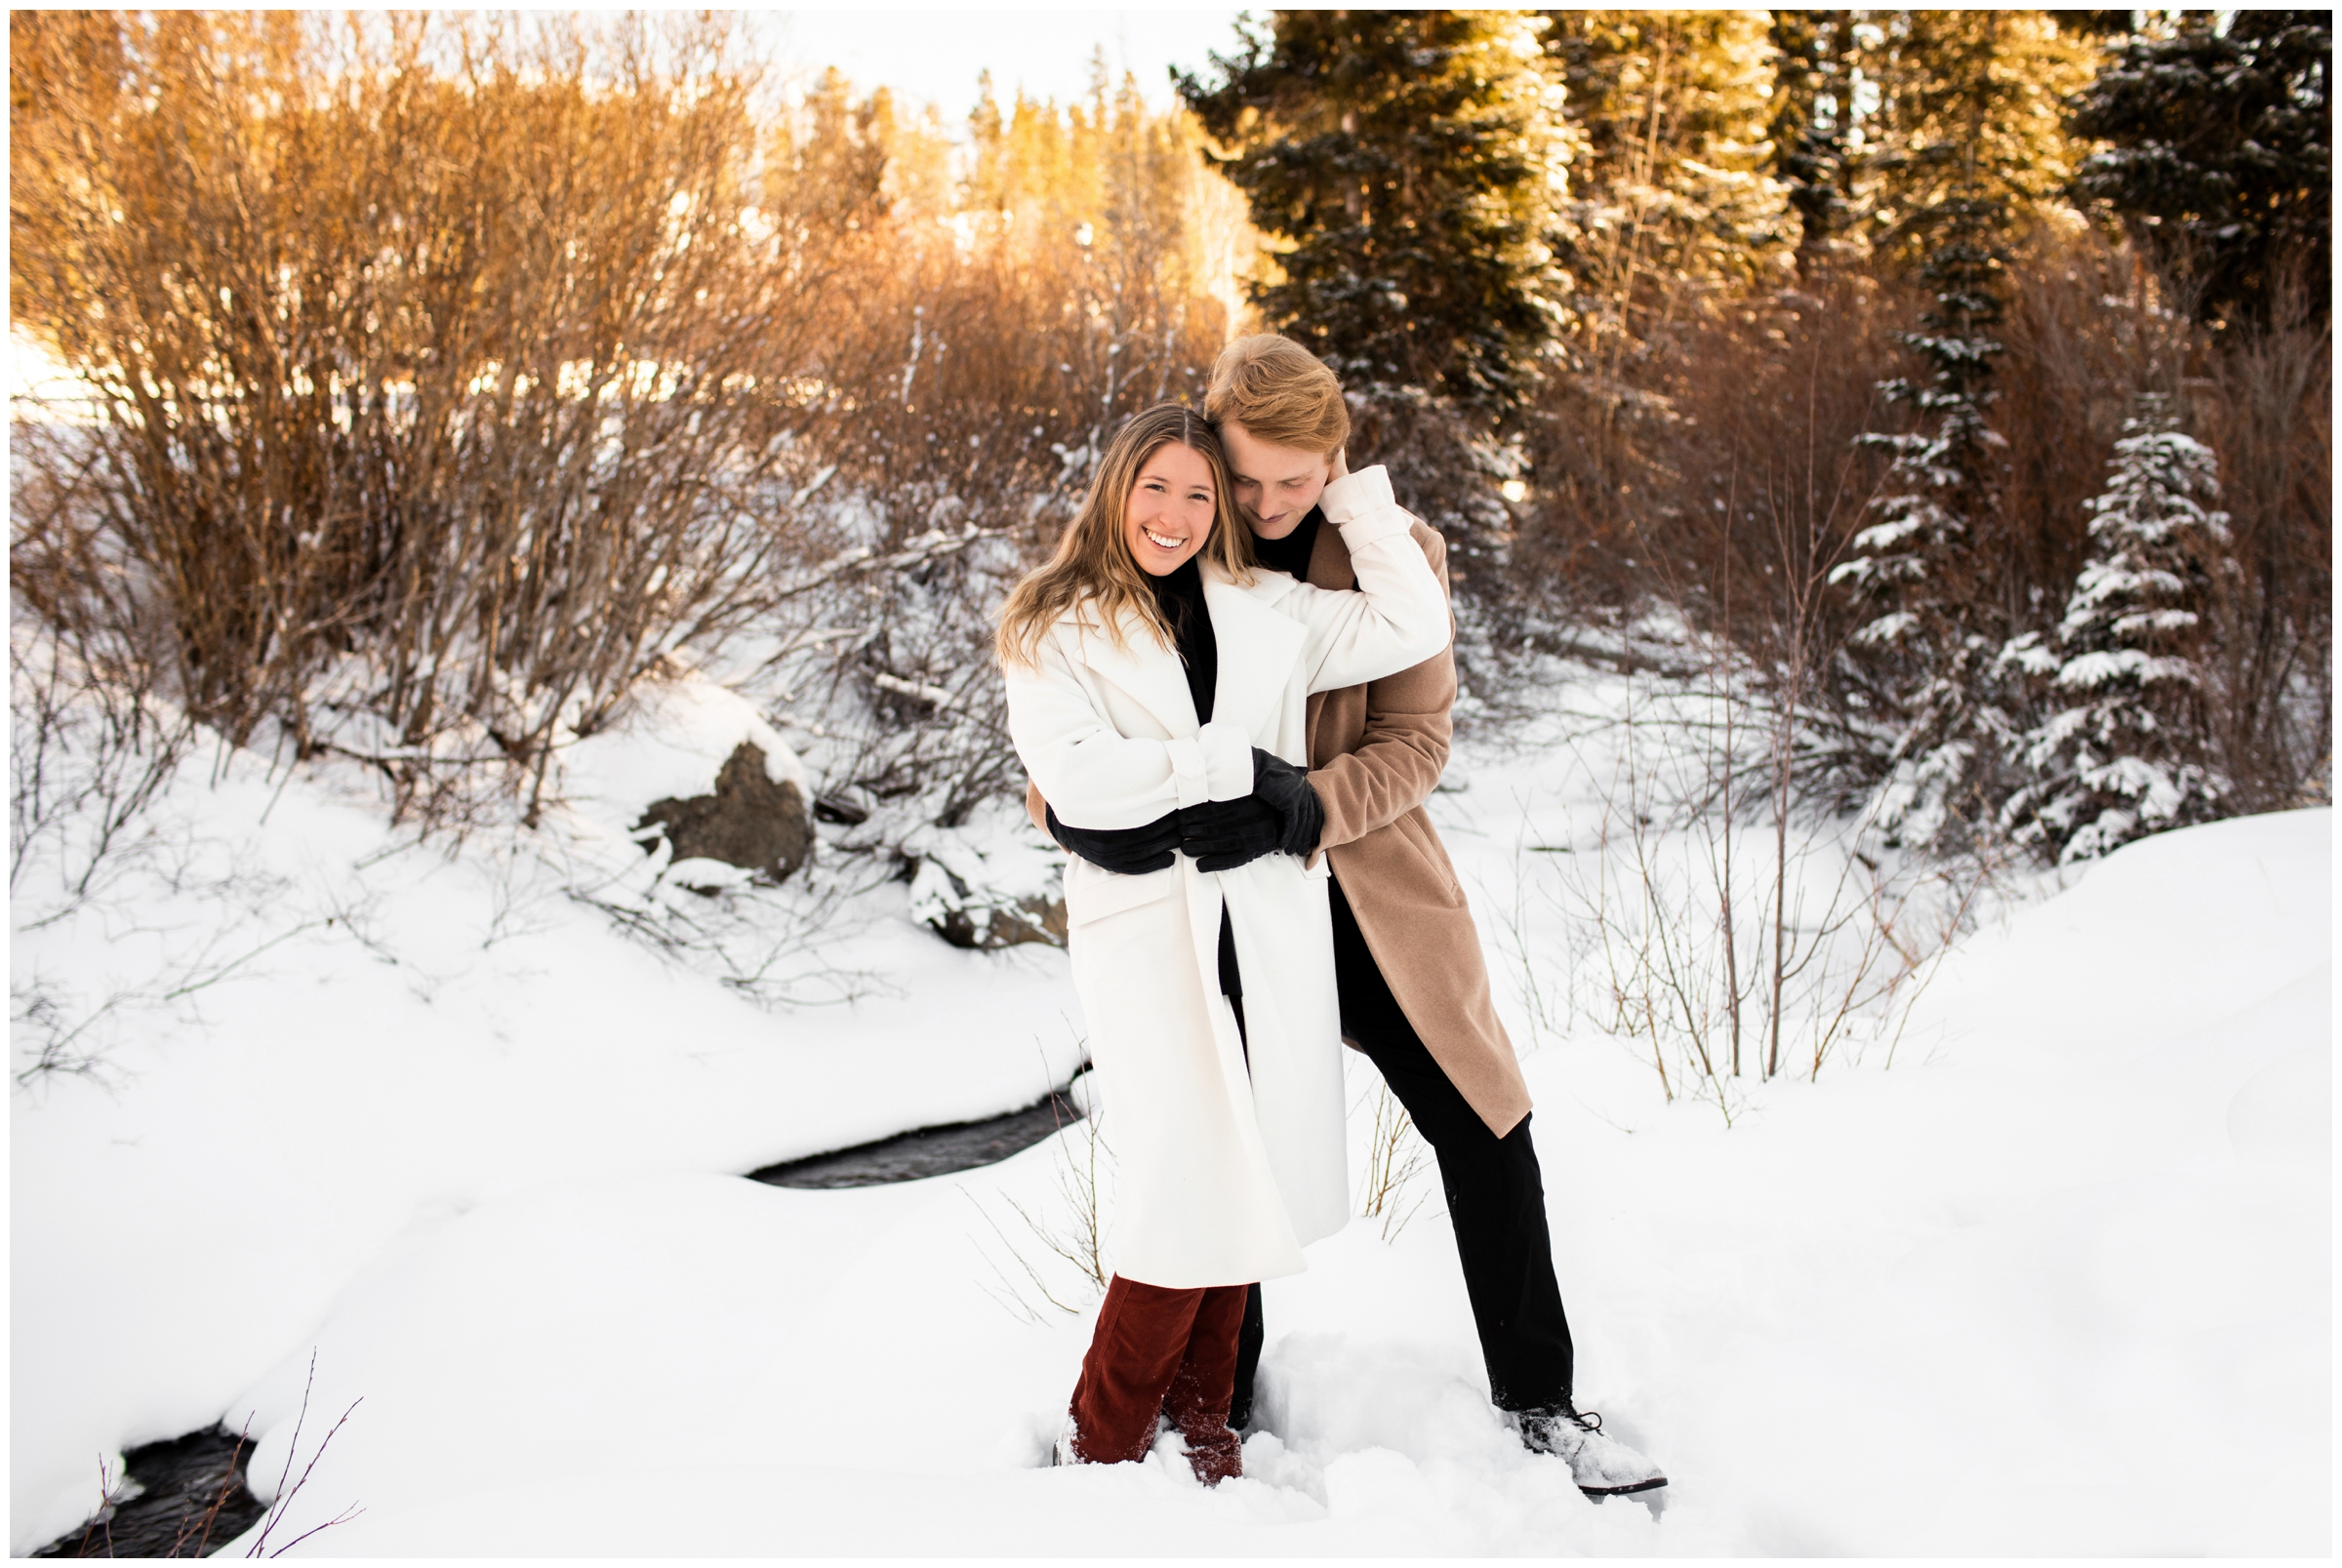 snowy winter engagement photography inspiration by Winter Park photographer Plum Pretty Photography 